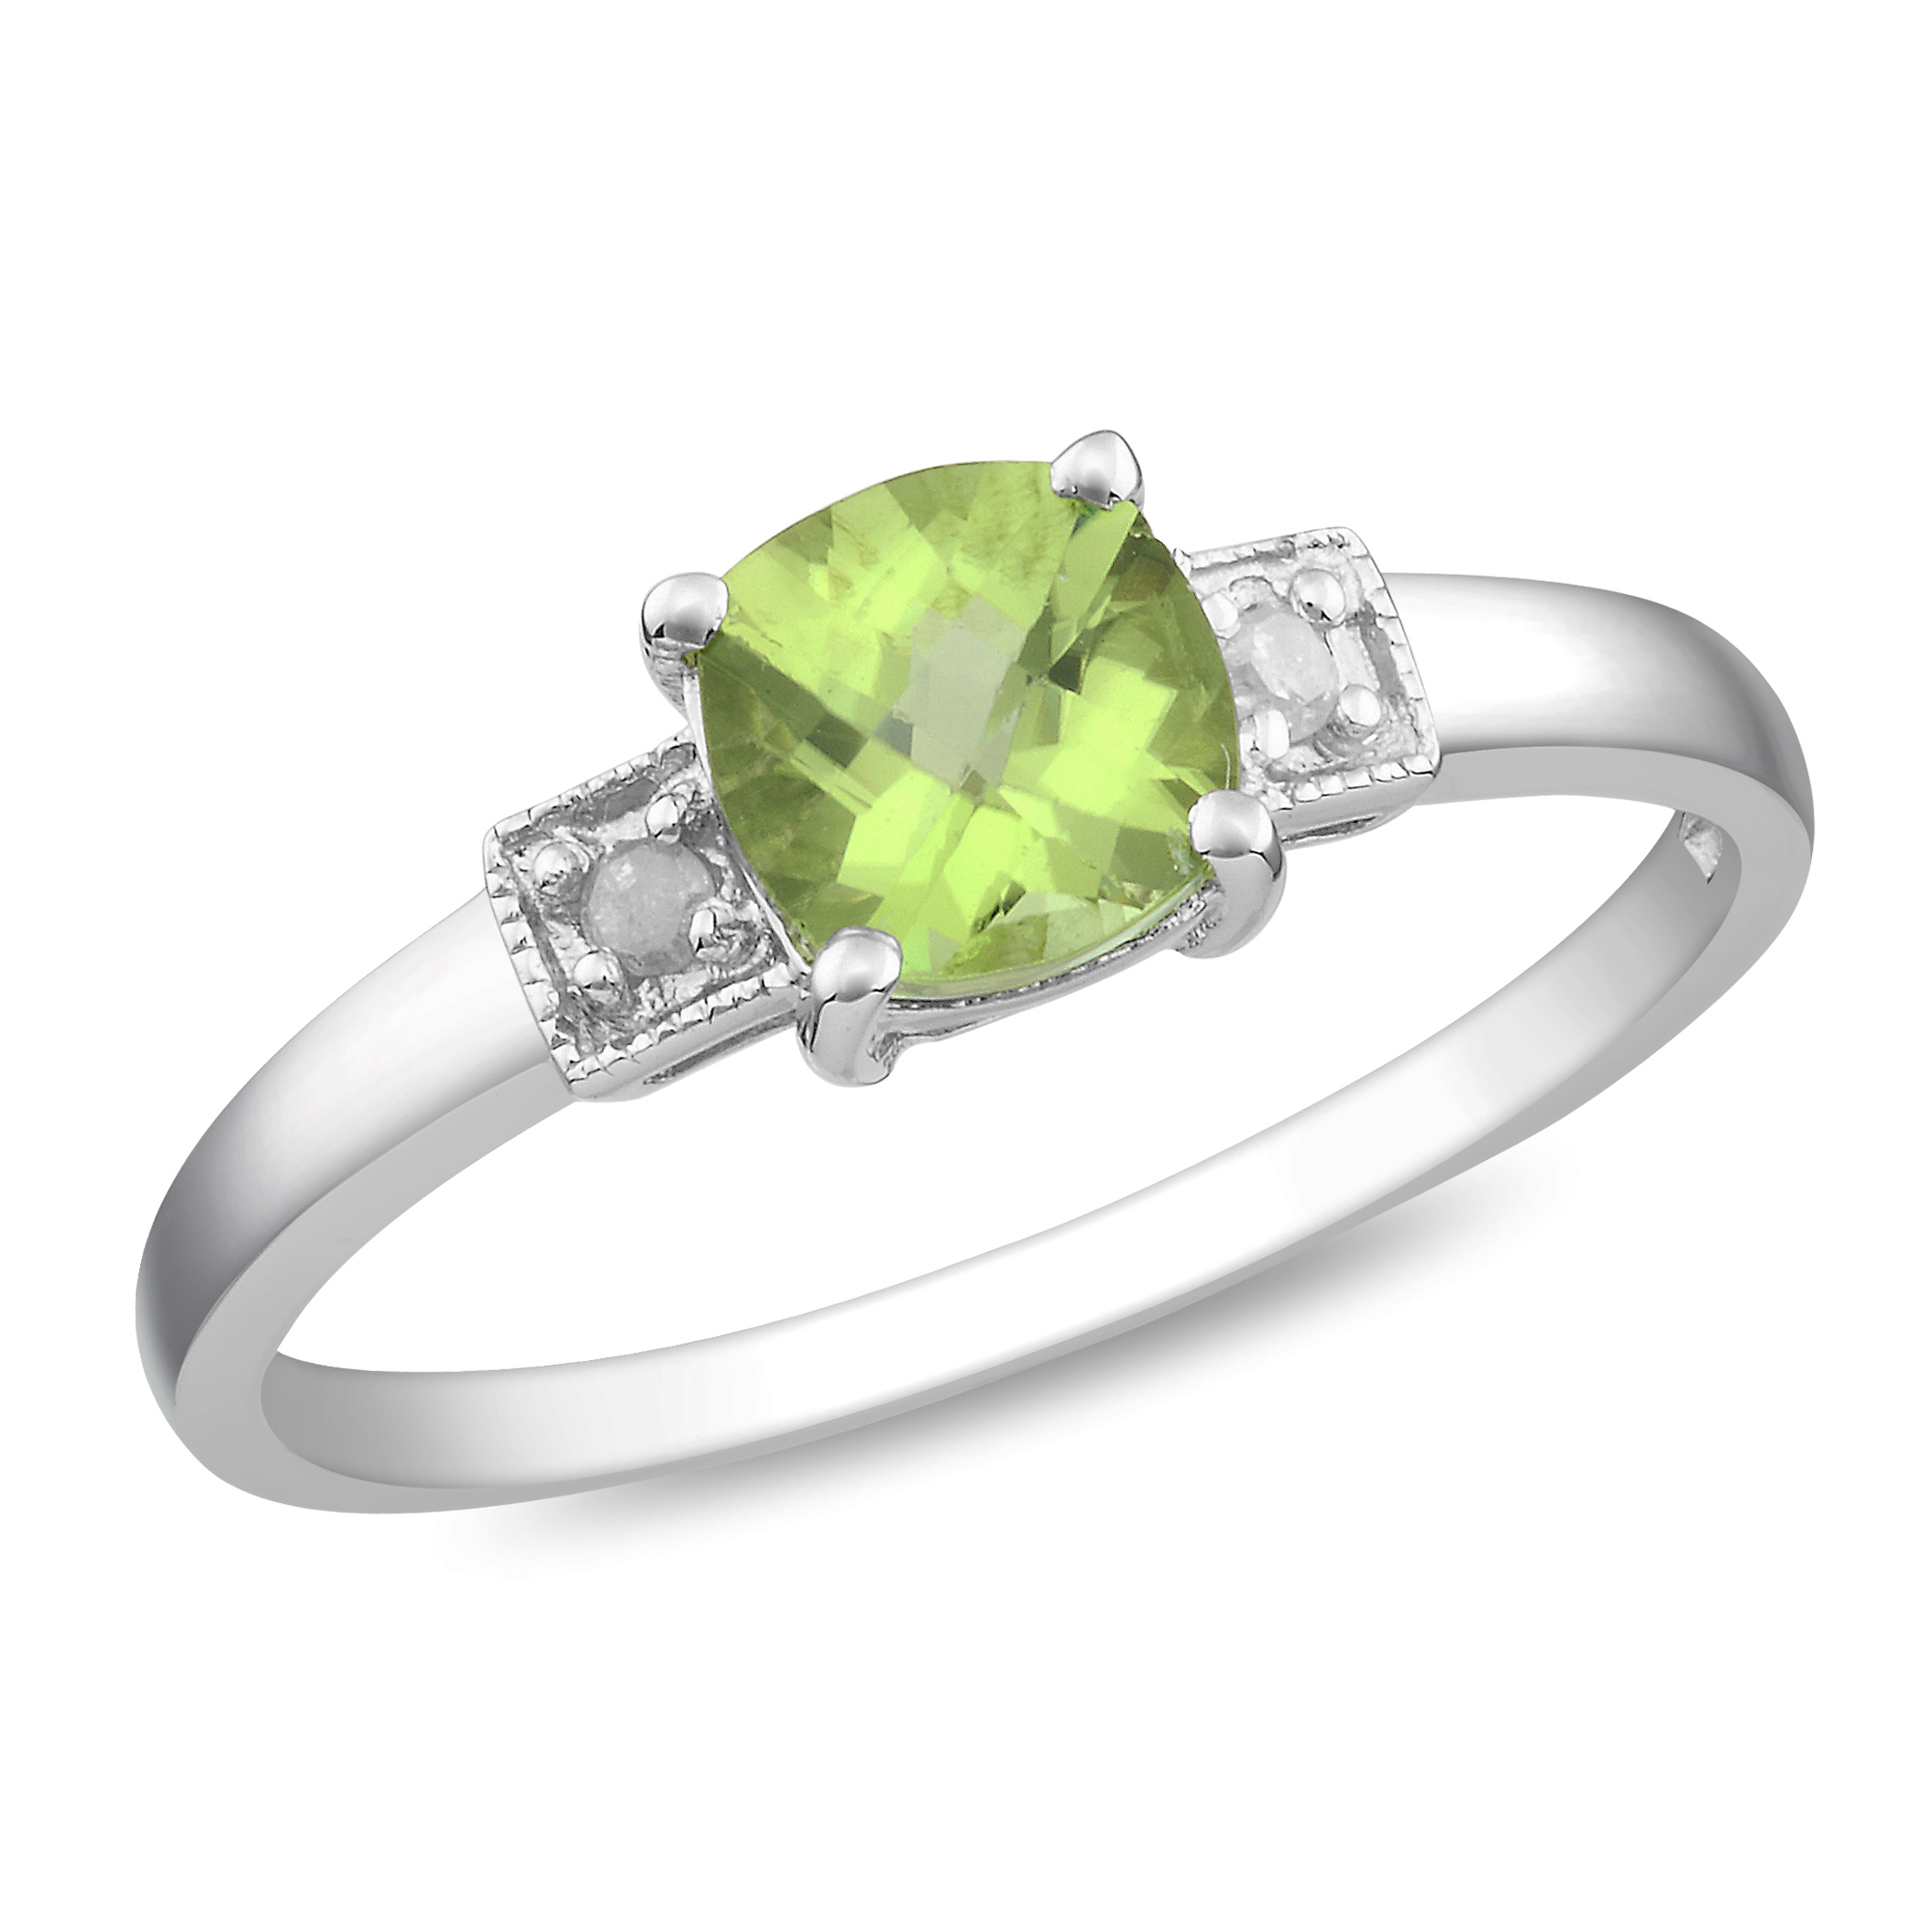 Amour 0.04 Carat T.W. Diamond and 1 1/10 Carat T.G.W. Peridot Fashion Ring in Sterling Silver I3